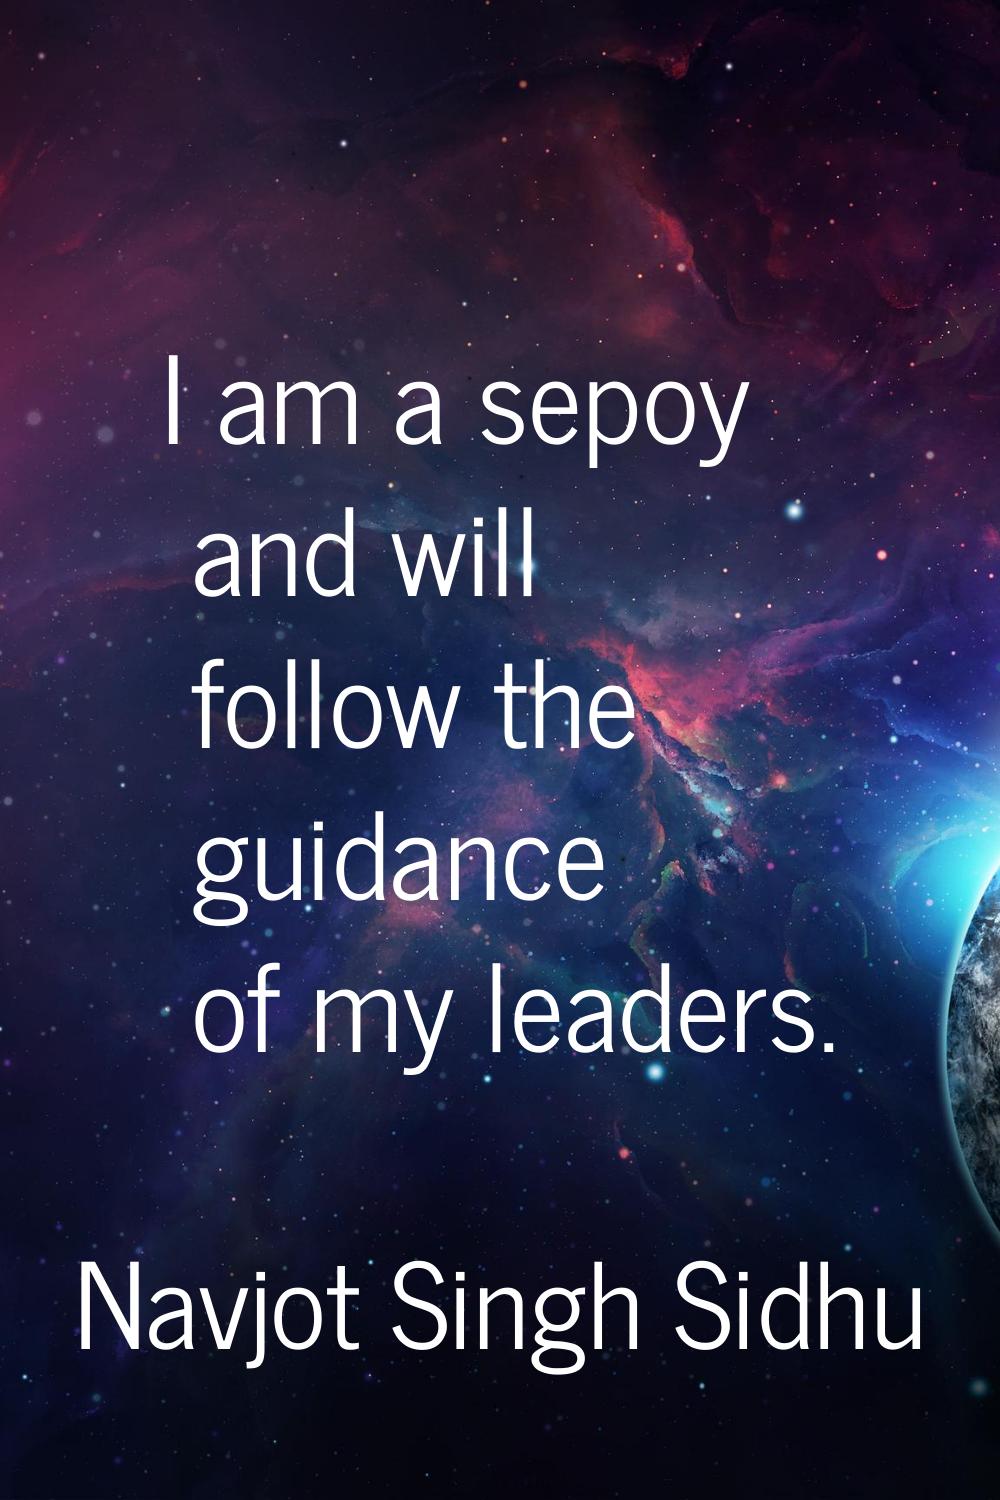 I am a sepoy and will follow the guidance of my leaders.